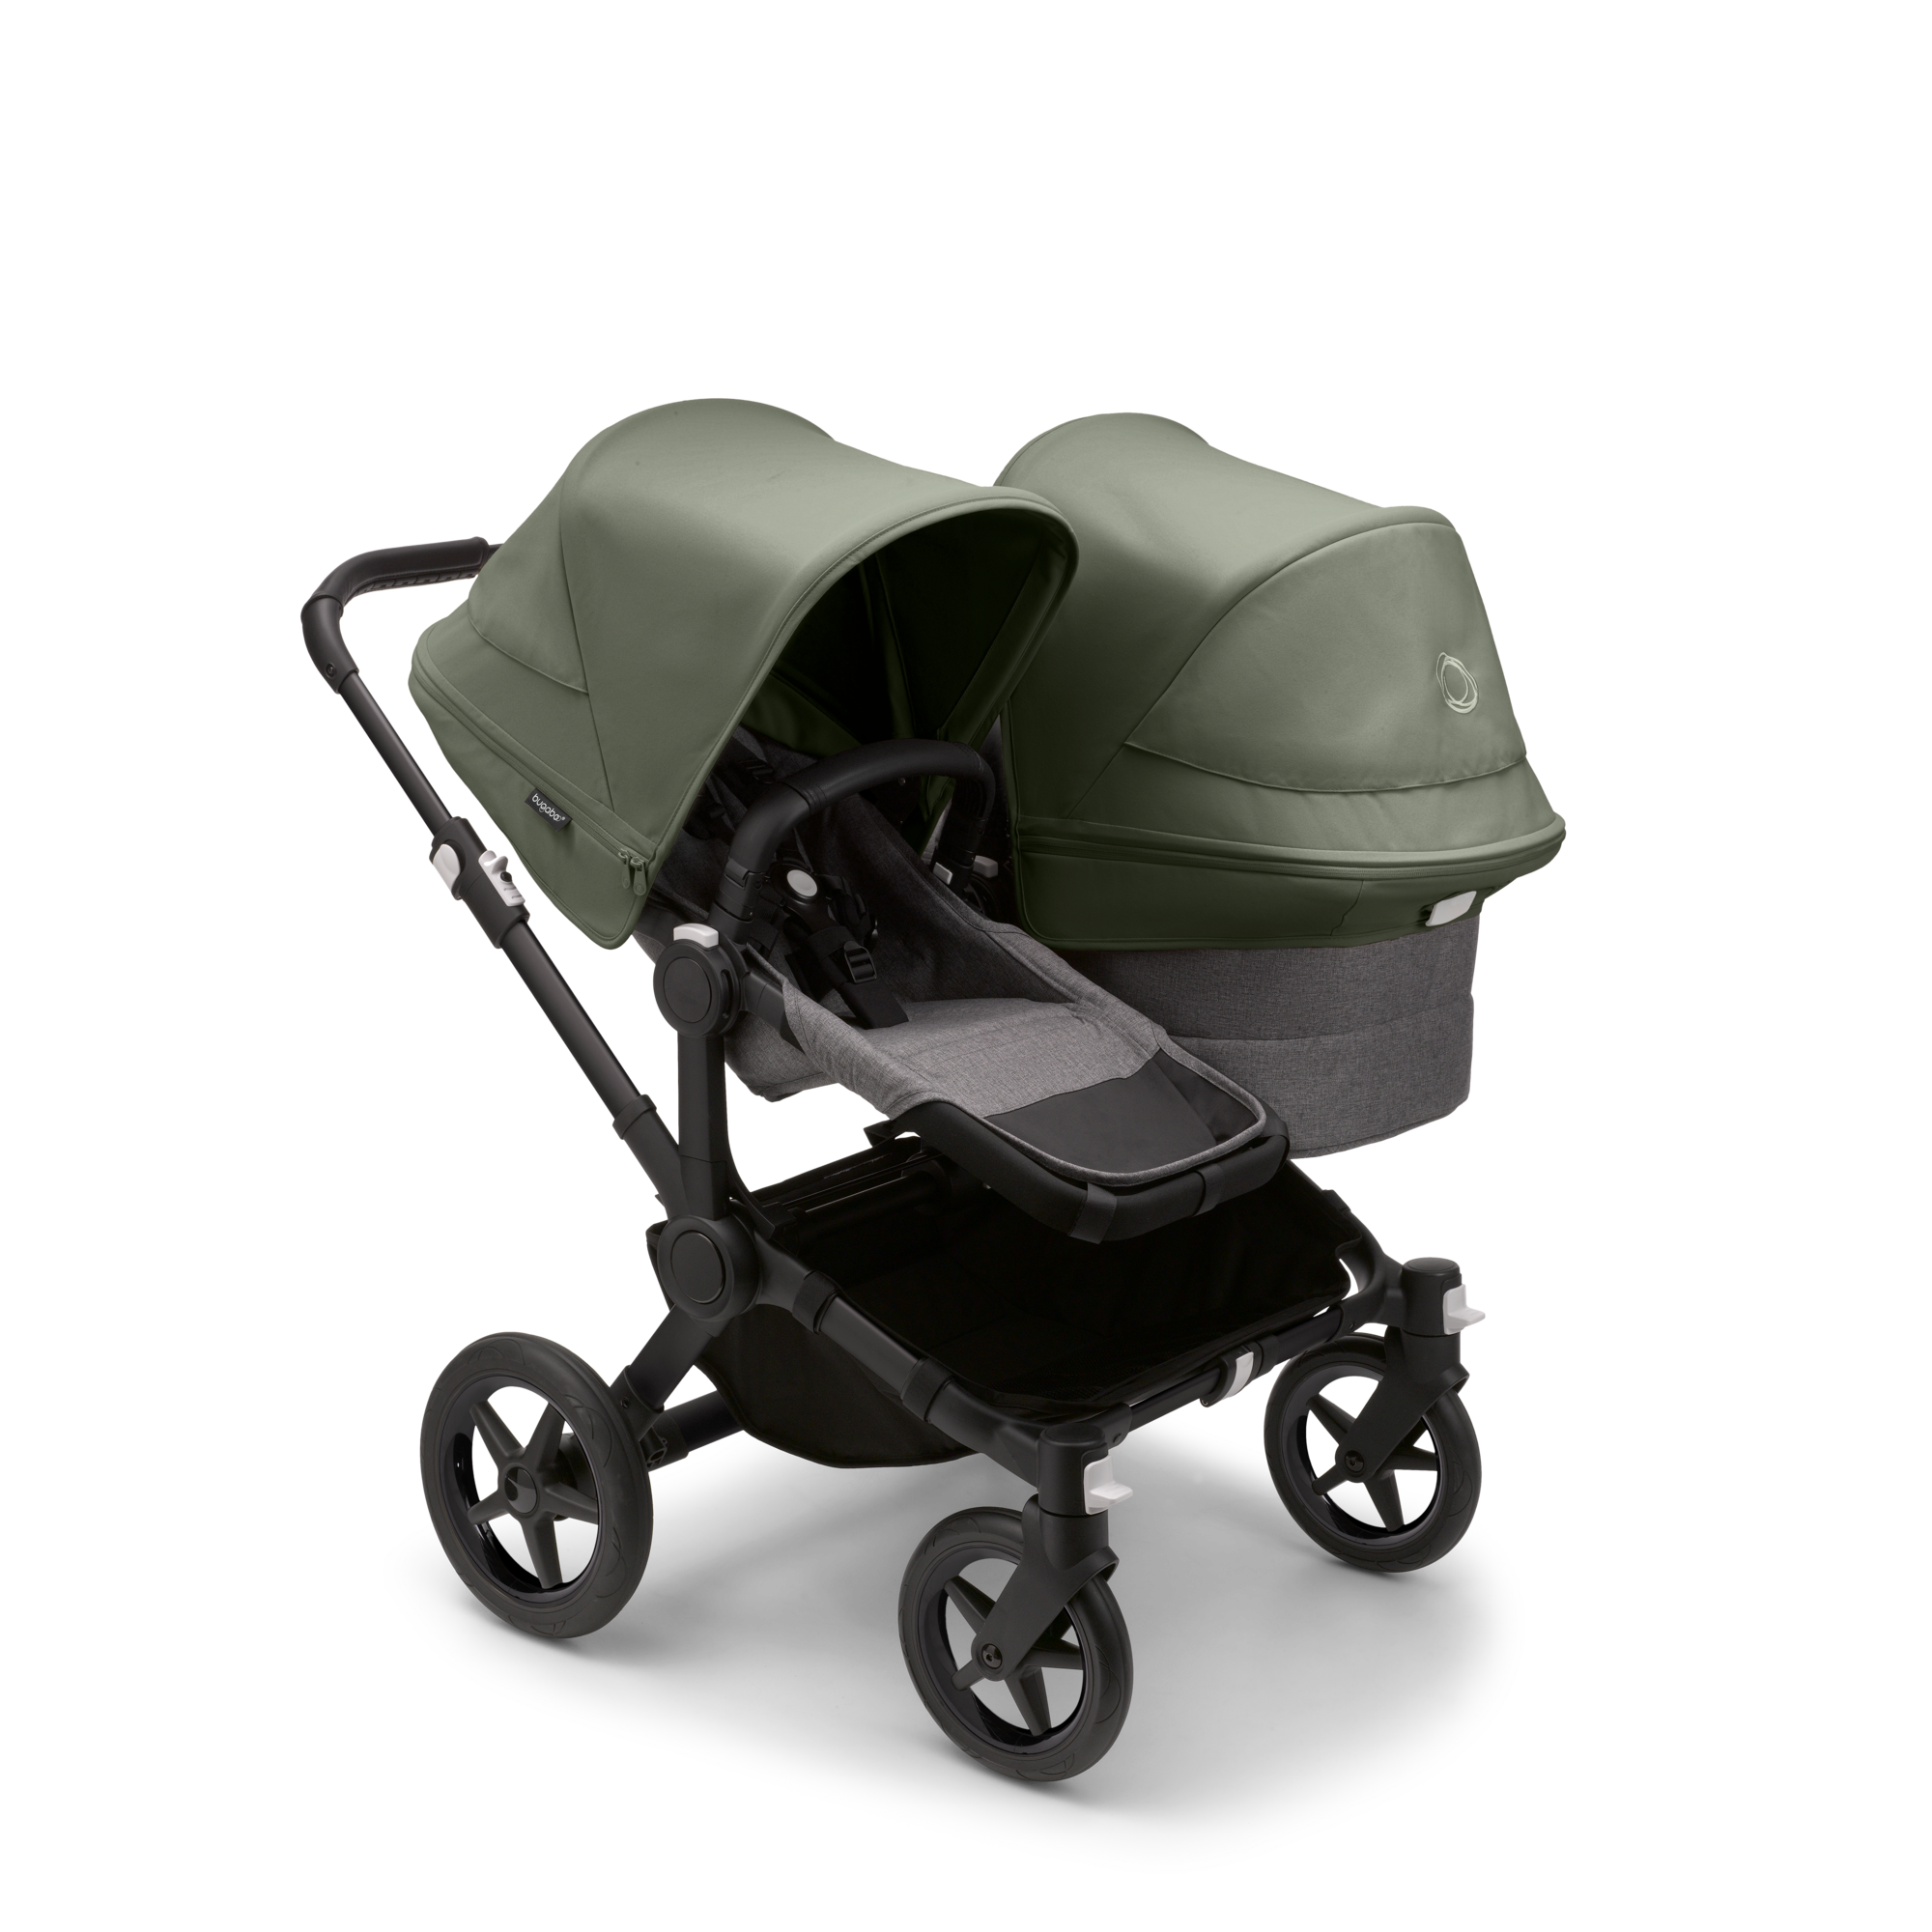 Bugaboo Donkey 5 Duo bassinet and seat stroller black base grey mélange fabrics forest green sun canopy